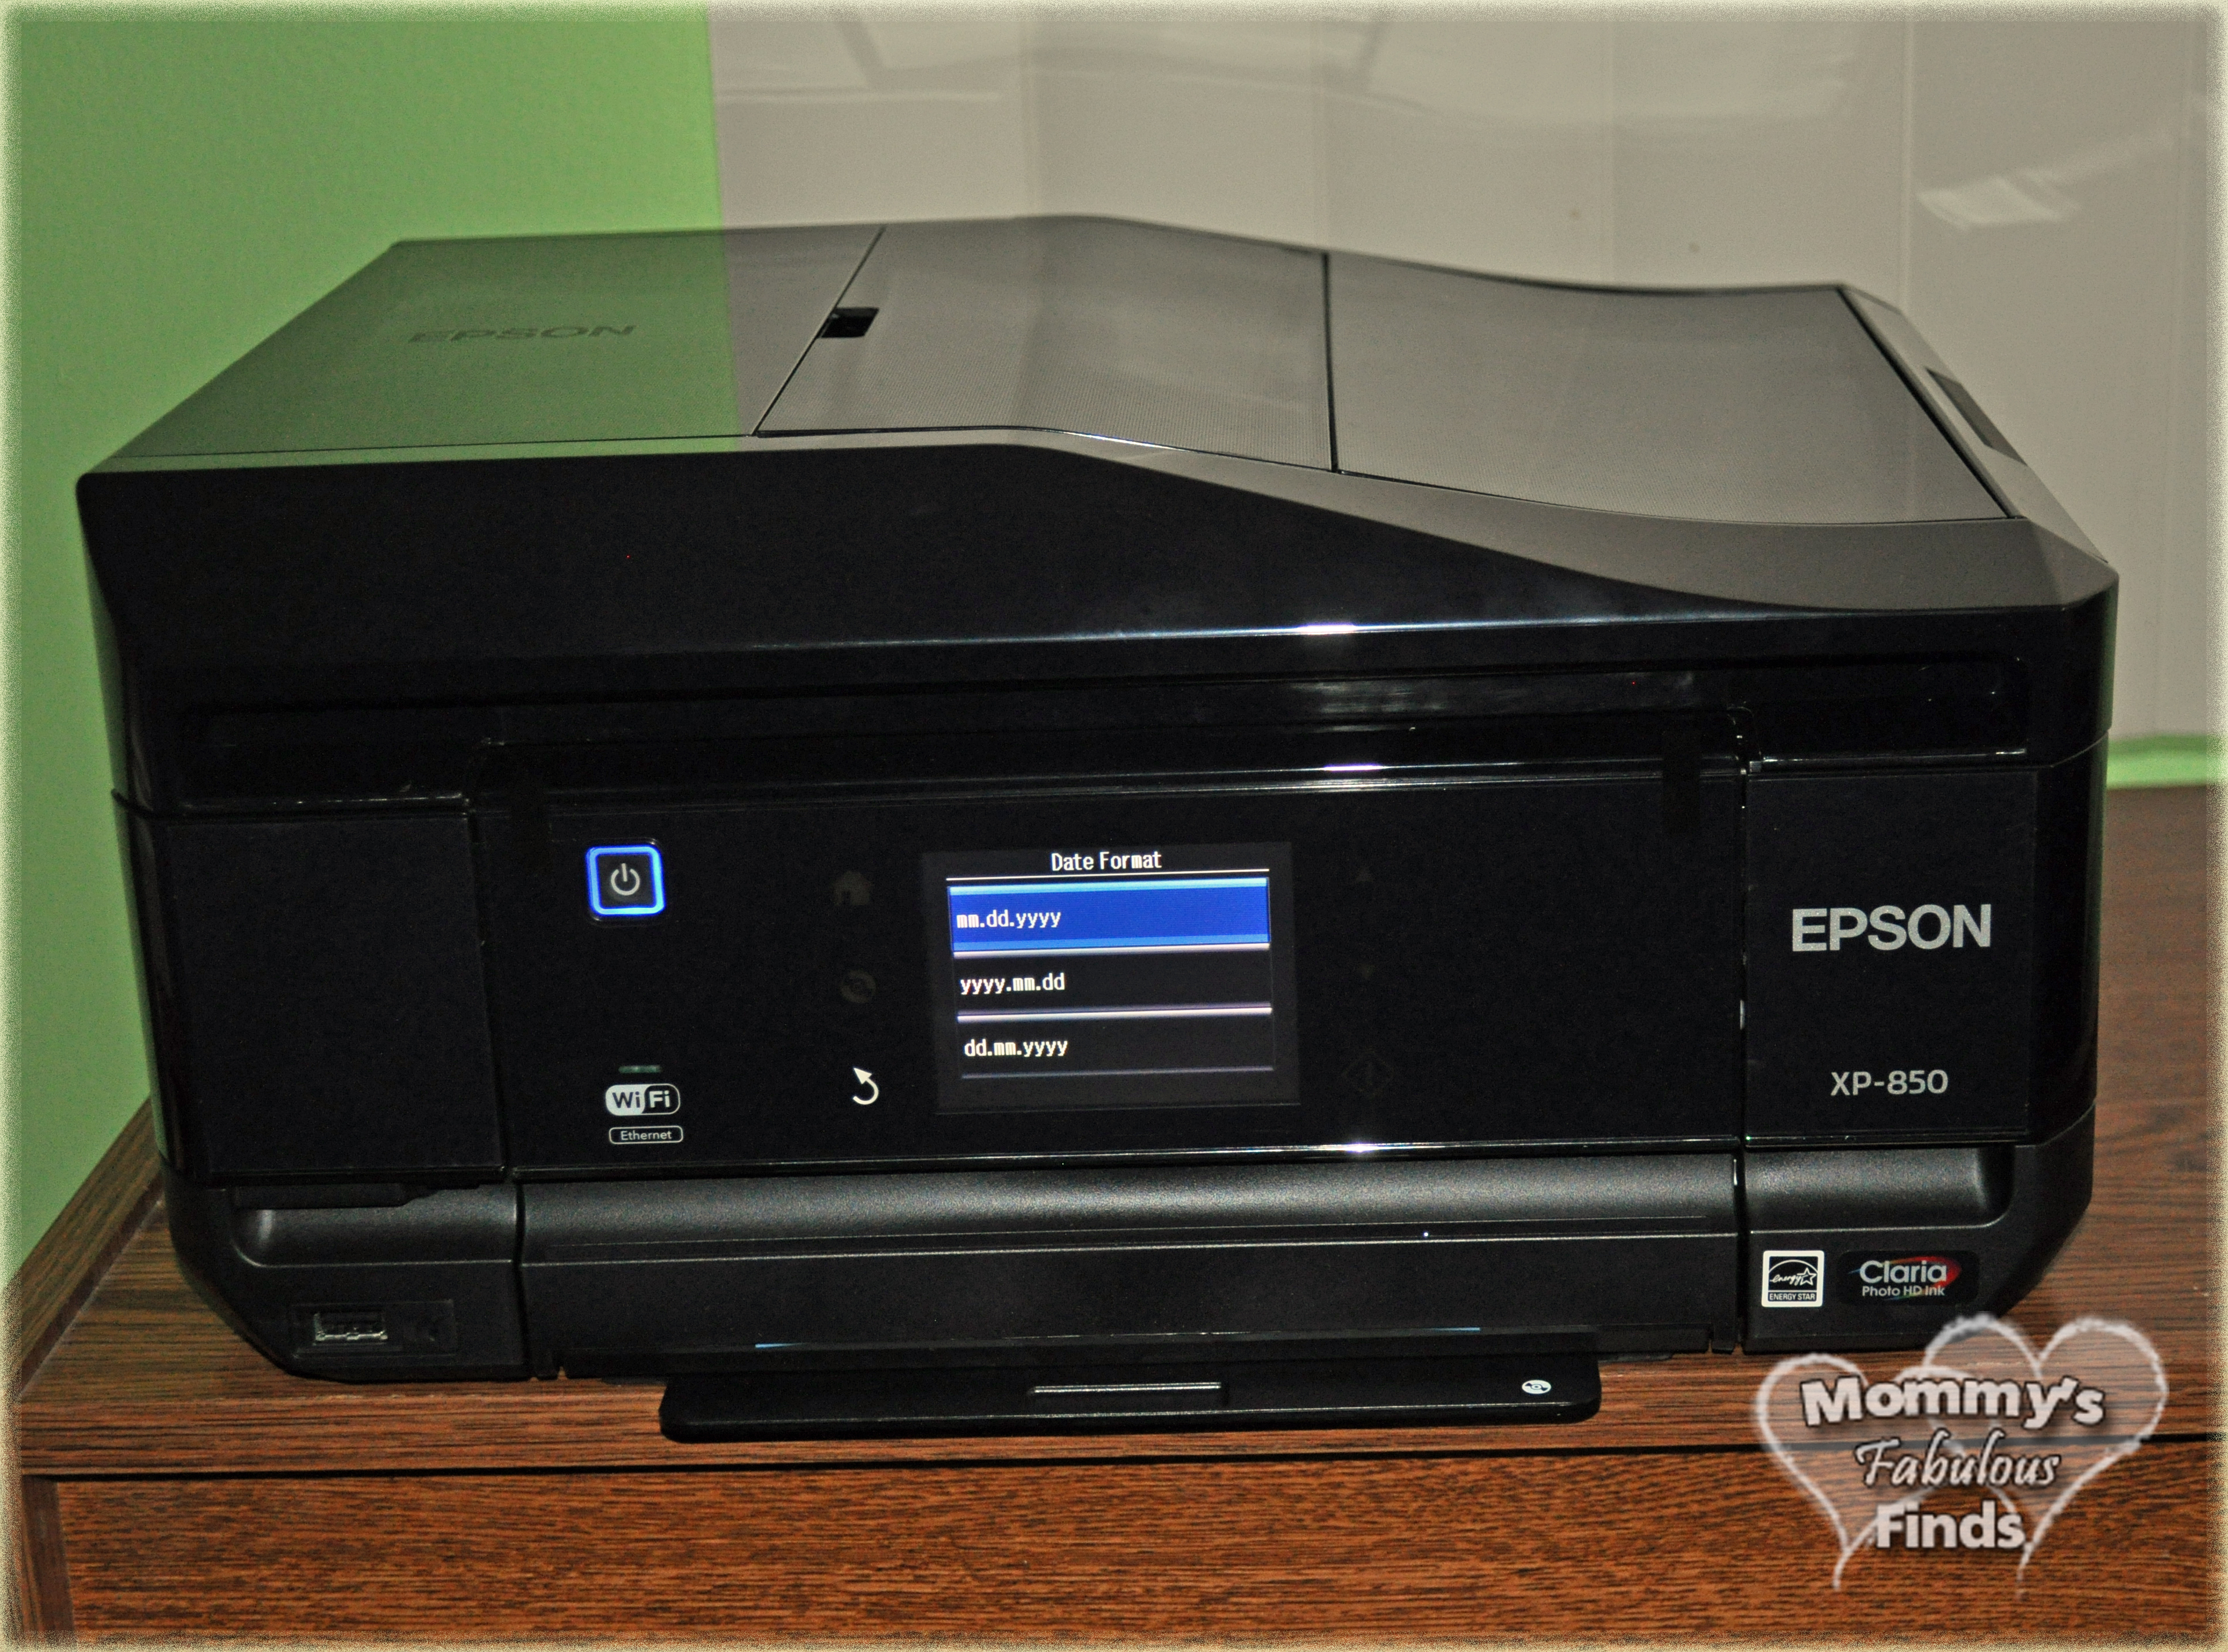 Tag et bad råb op procedure Epson Expression Photo XP-850 Small-in-One Printer Review - Mommy's  Fabulous Finds